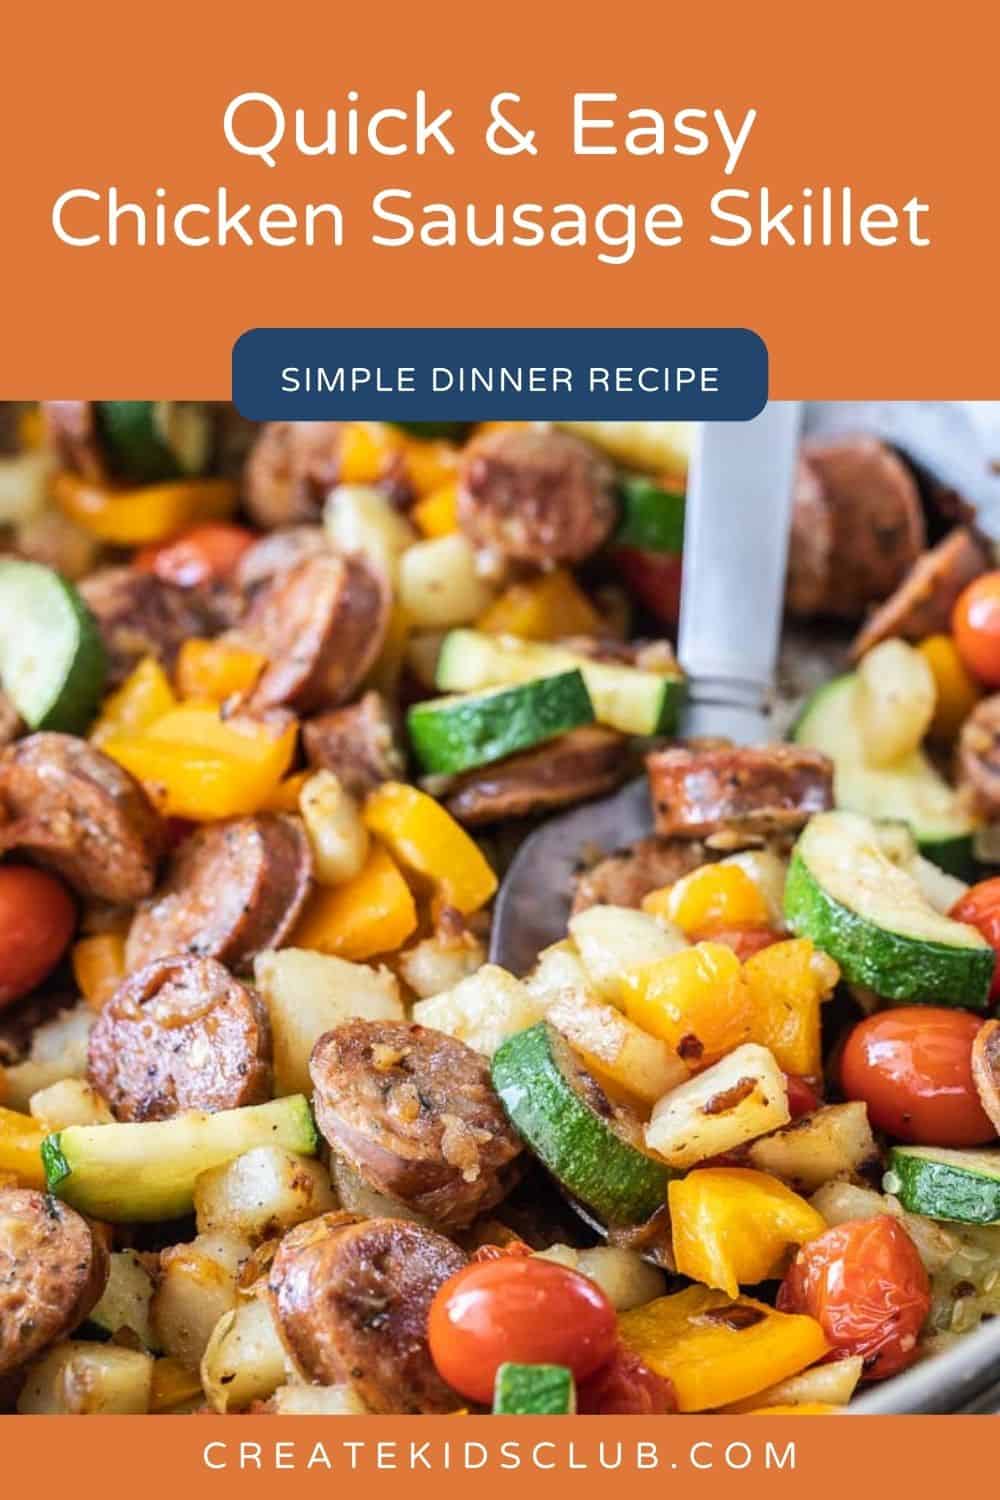 Pin of a chicken sausage skillet with veggies.